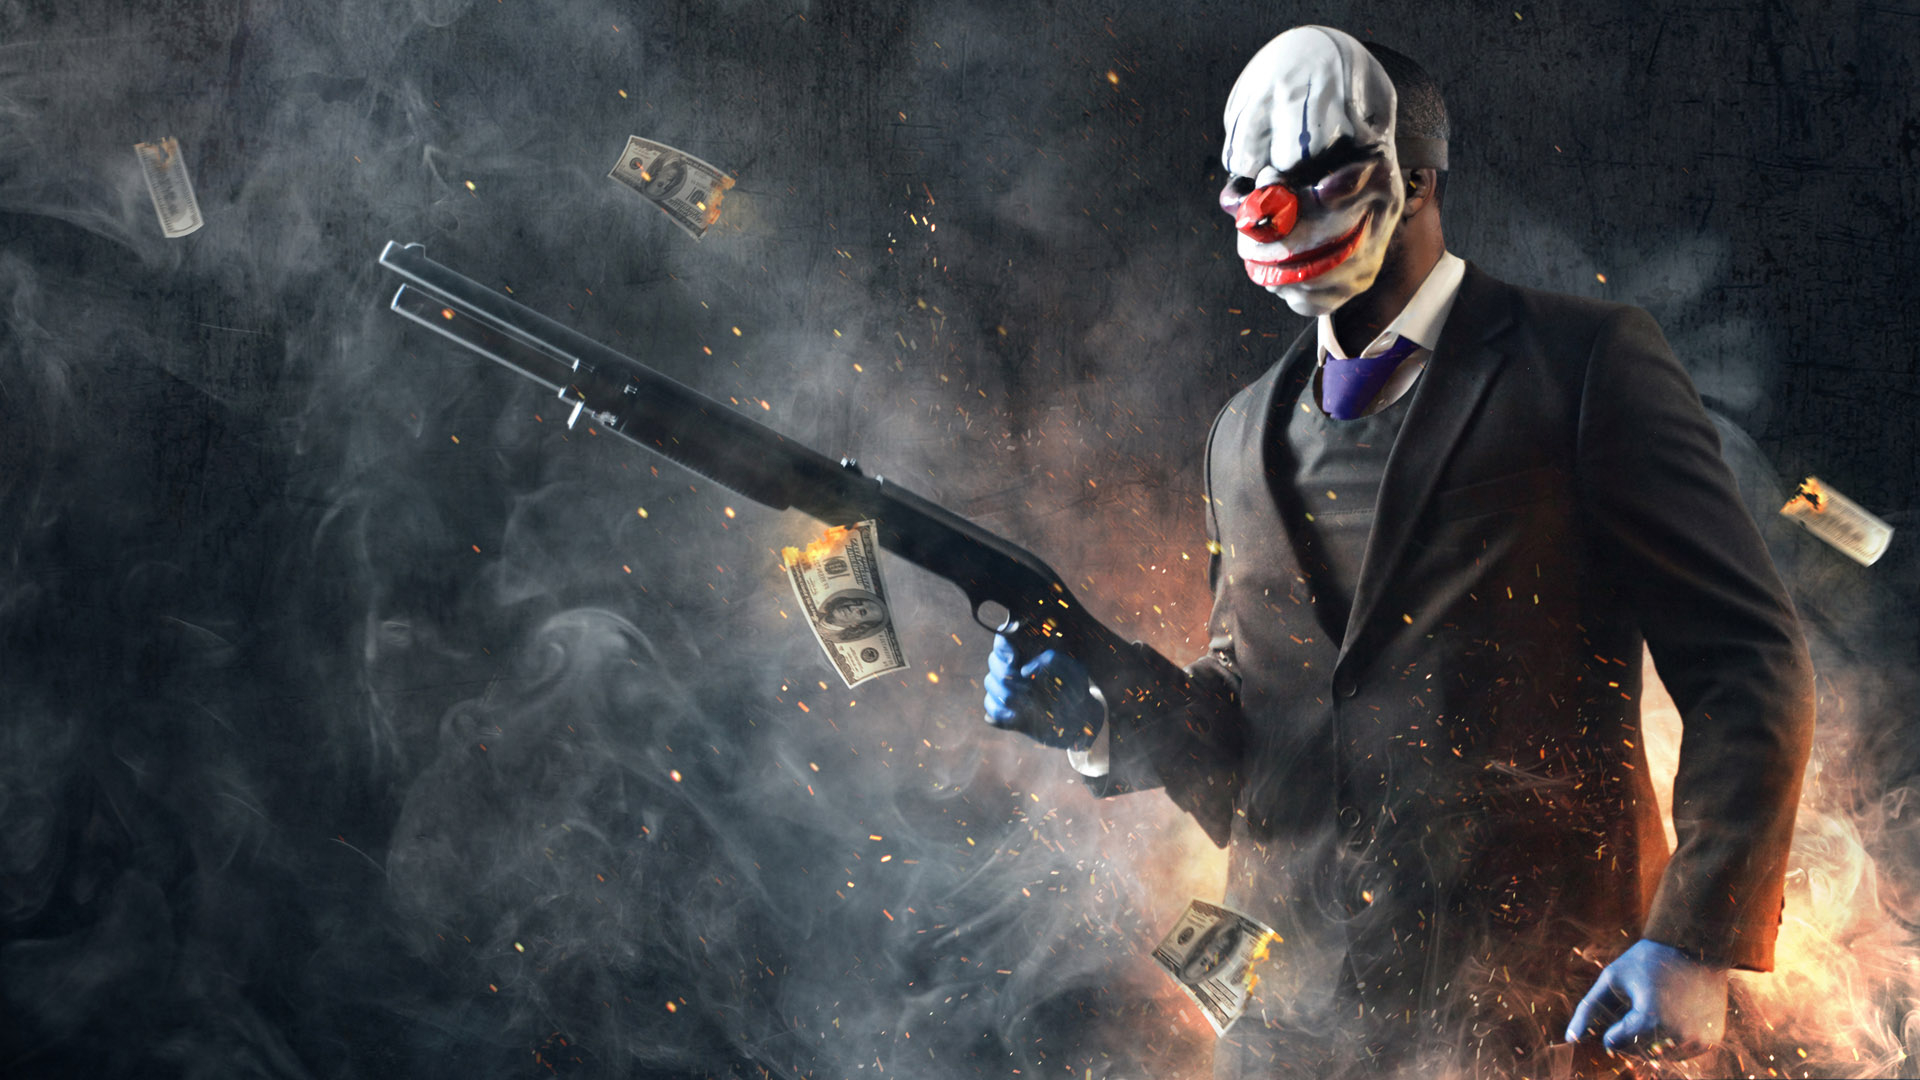 1920x1080 90+ Payday 2 HD Wallpapers and Backgrounds